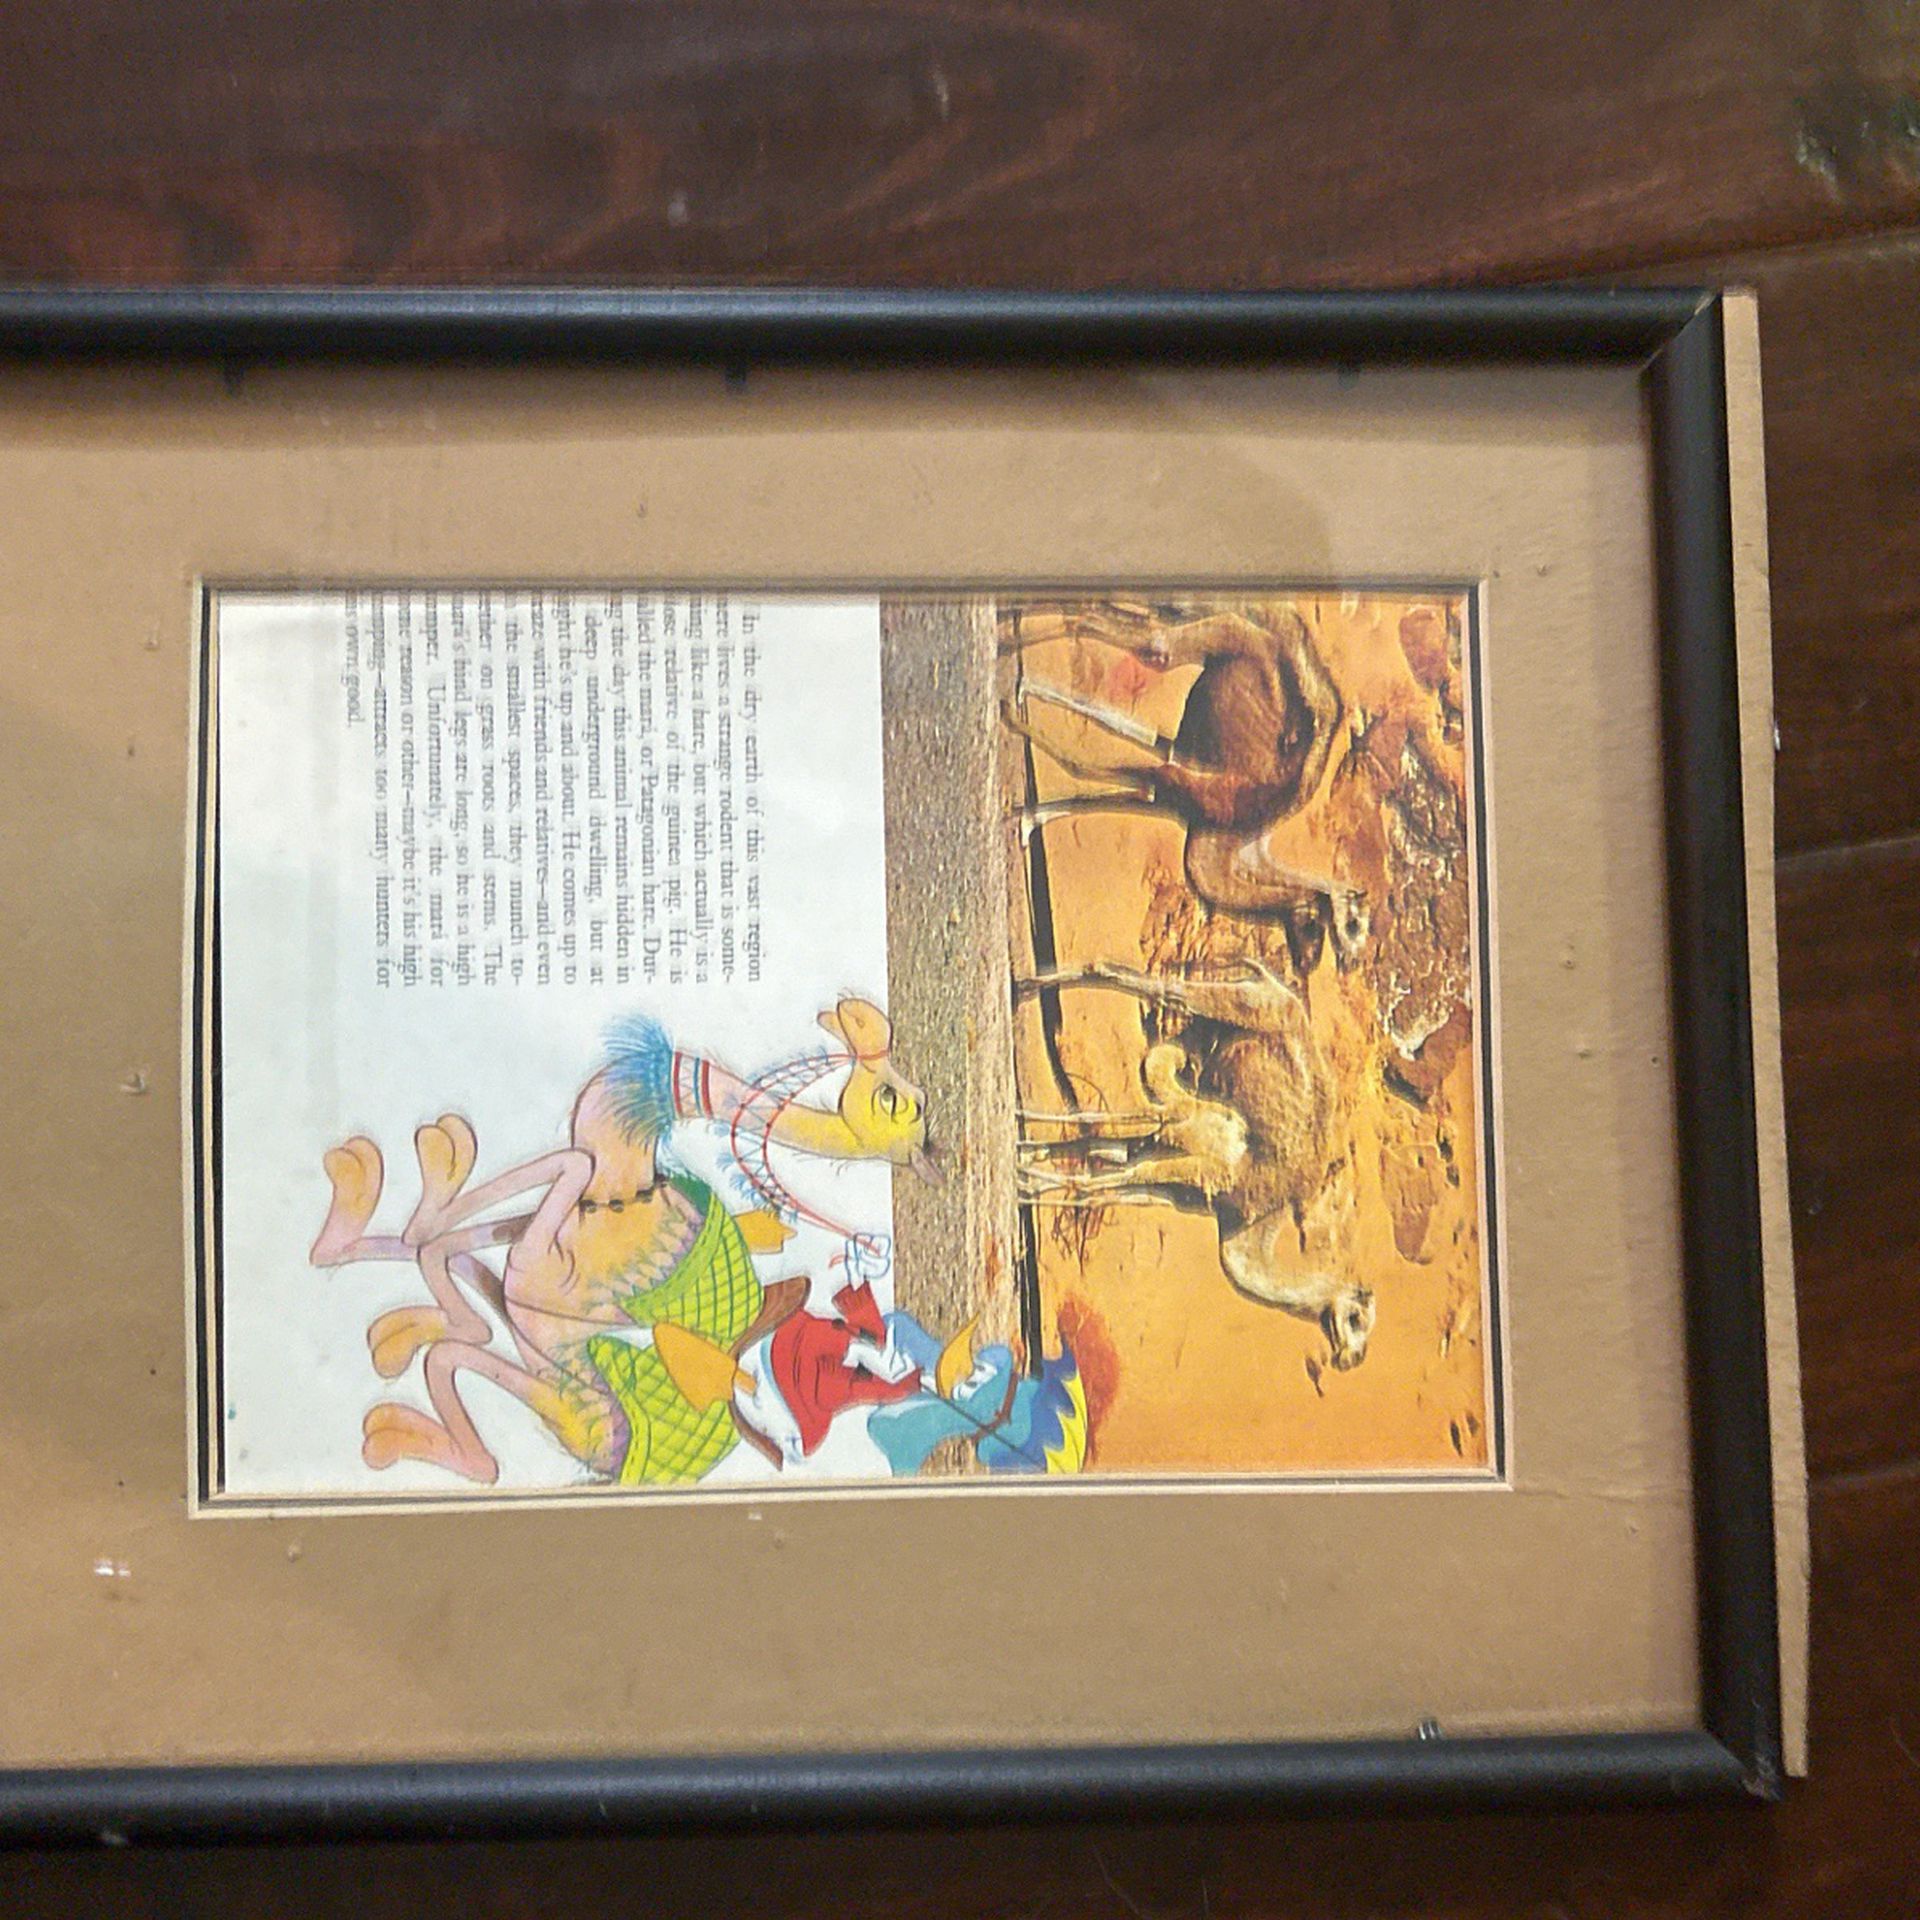 Donald Duck Rides A Camel Very Cute Picture 8 X 10 In Frame